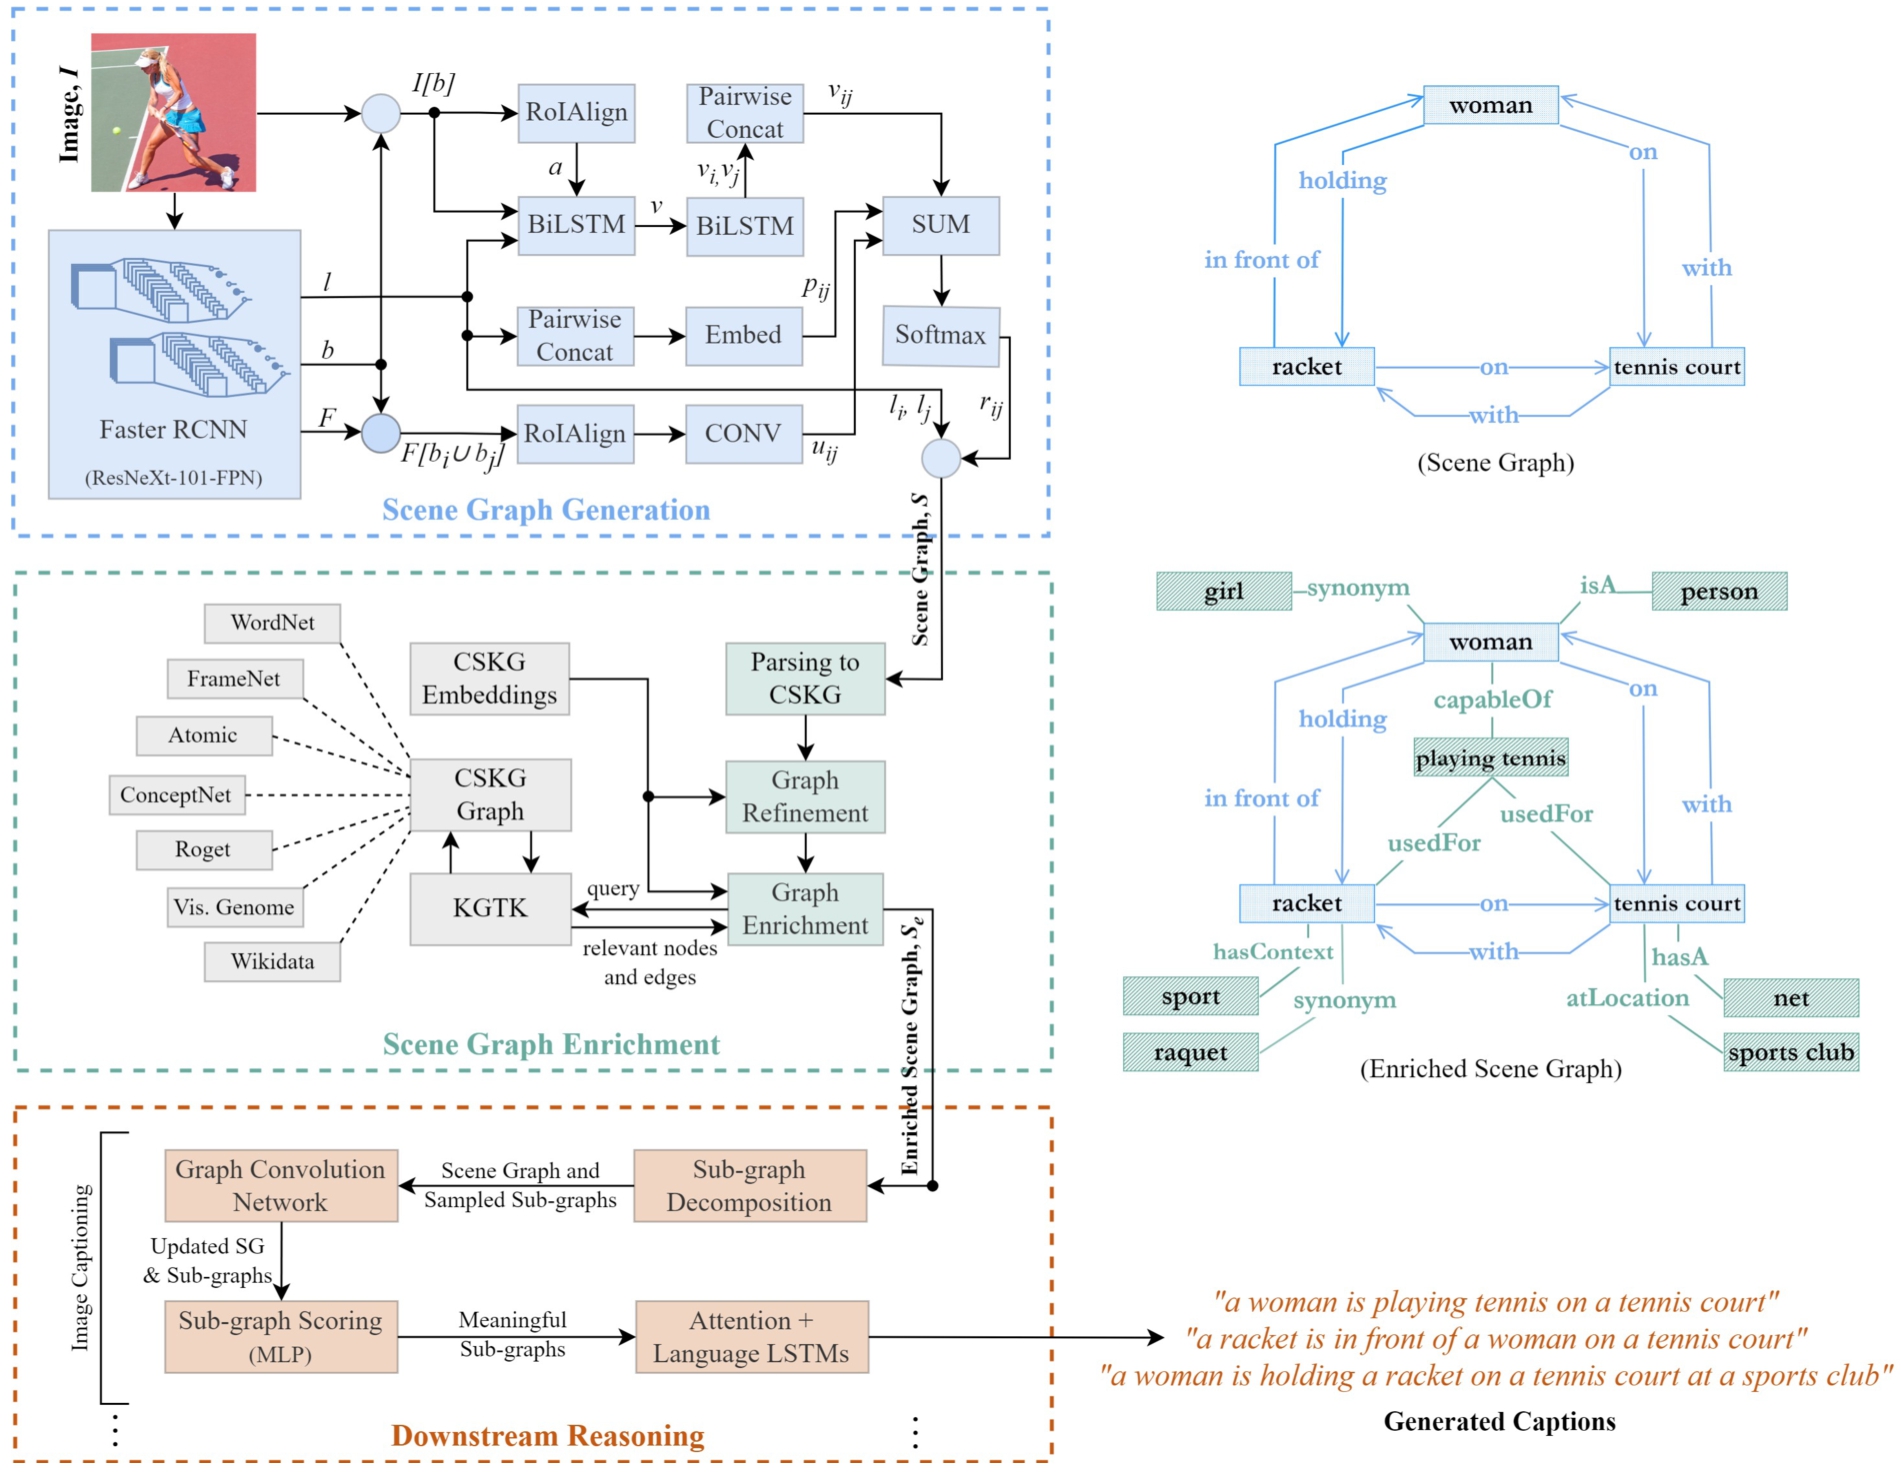 Proposed neural-symbolic visual understanding and reasoning framework based on enriched scene graph representation.